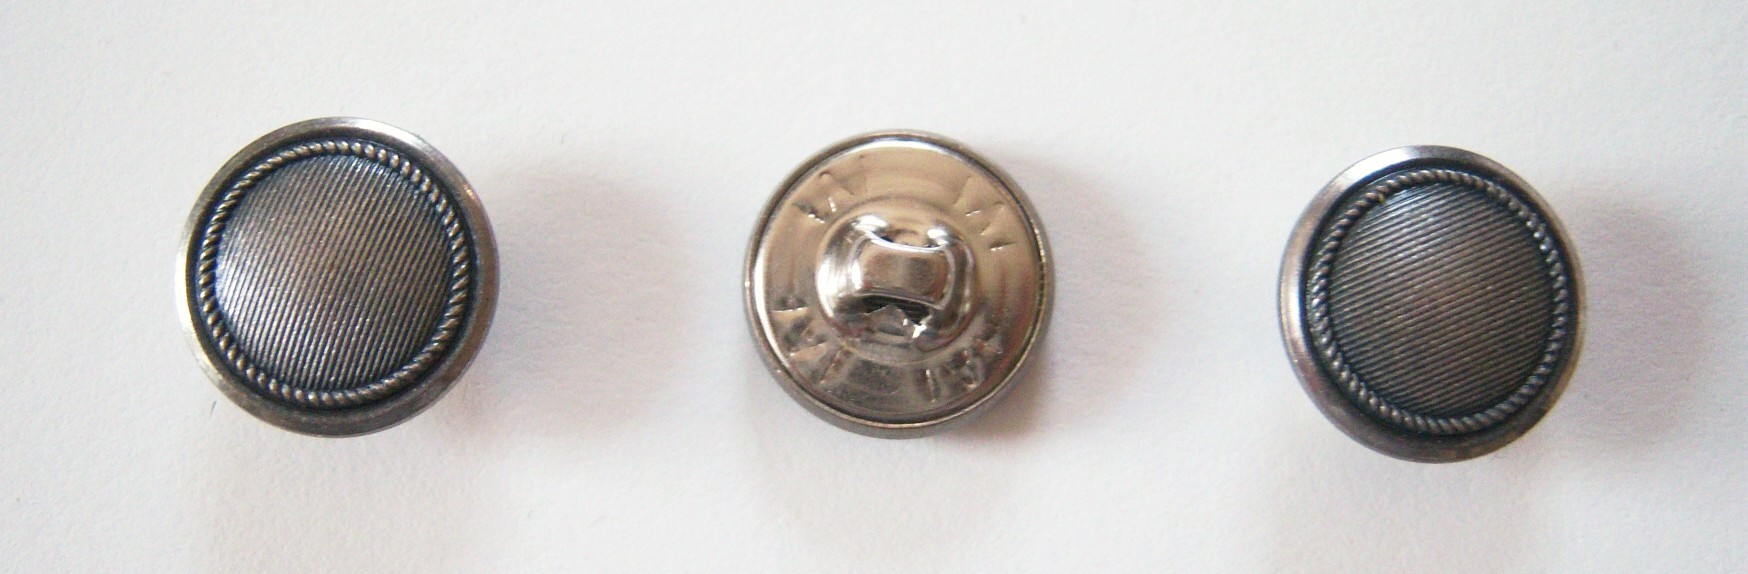 Pewter 5/8" 4 Hole Button